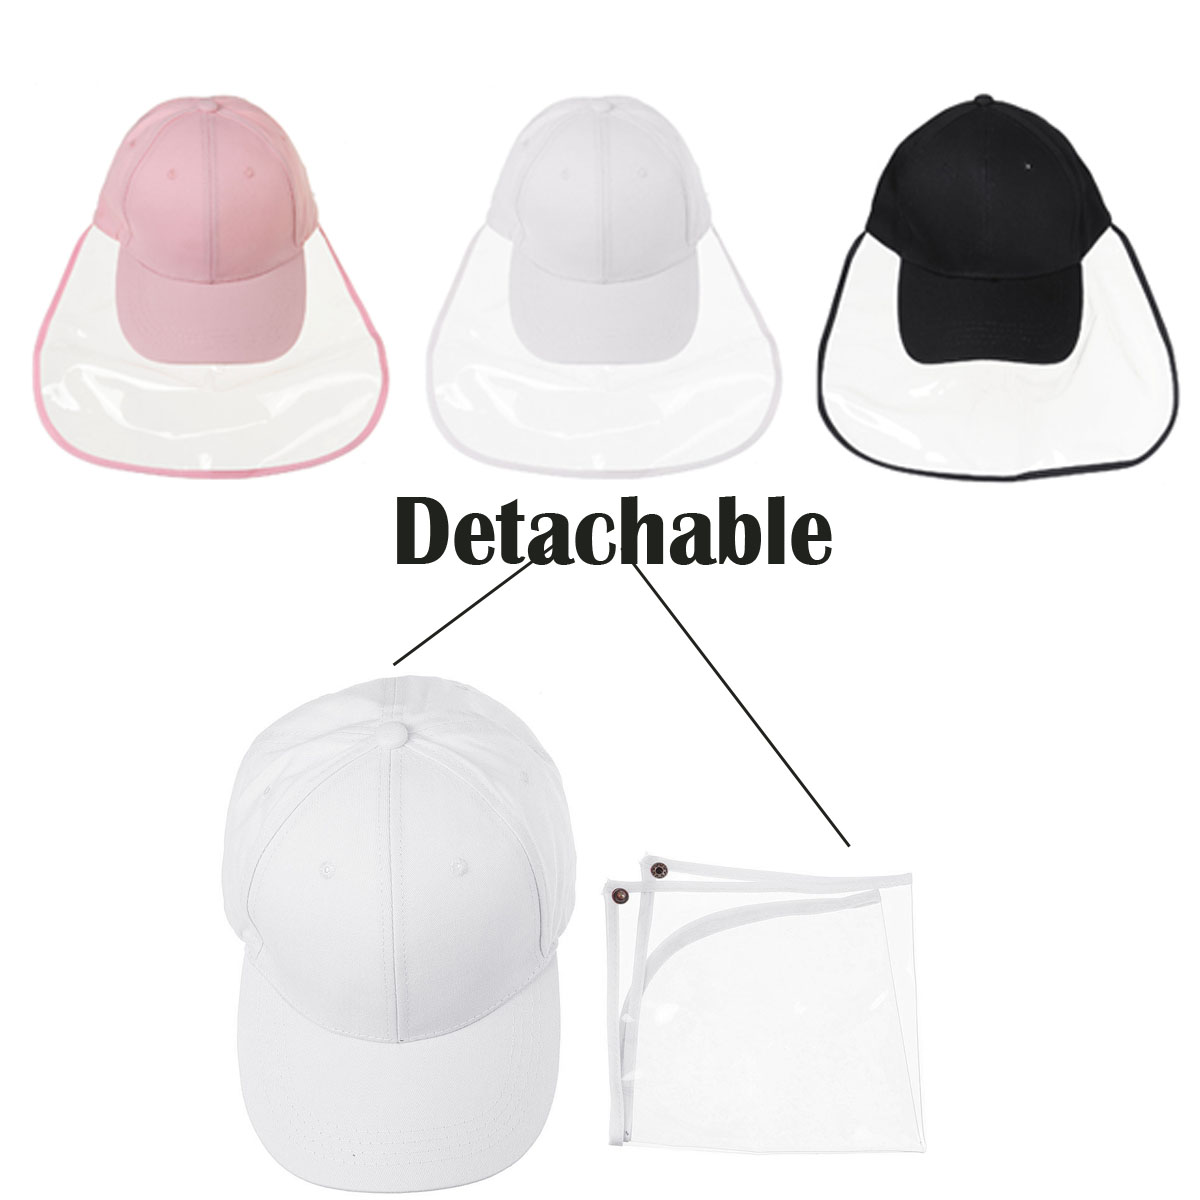 Clear-Full-Face-Hat-Waterproof-Cover-Mask-Cap-Shield-Protective-Anti-spitting-1659895-2